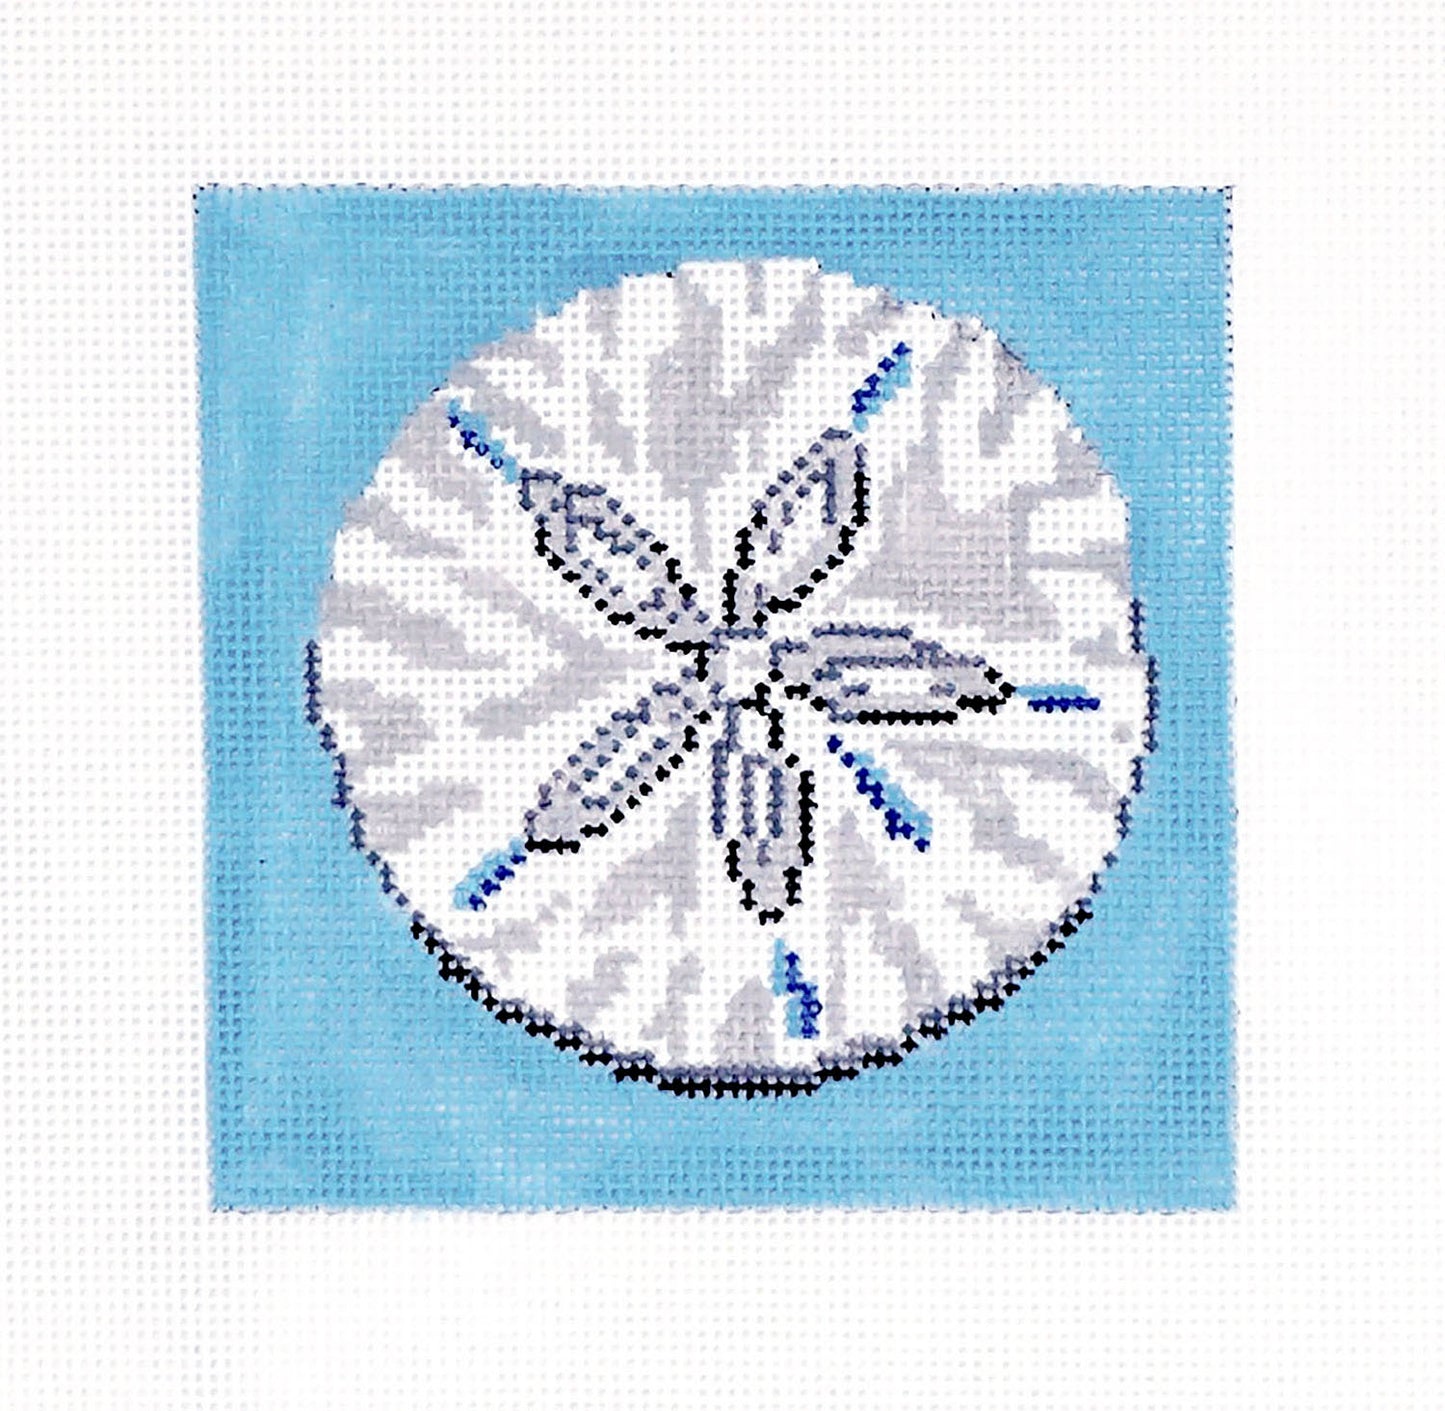 Seaside Canvas ~ White Sand Dollar on Blue 18 Mesh handpainted 4" Sq. Needlepoint Canvas by Needle Crossings